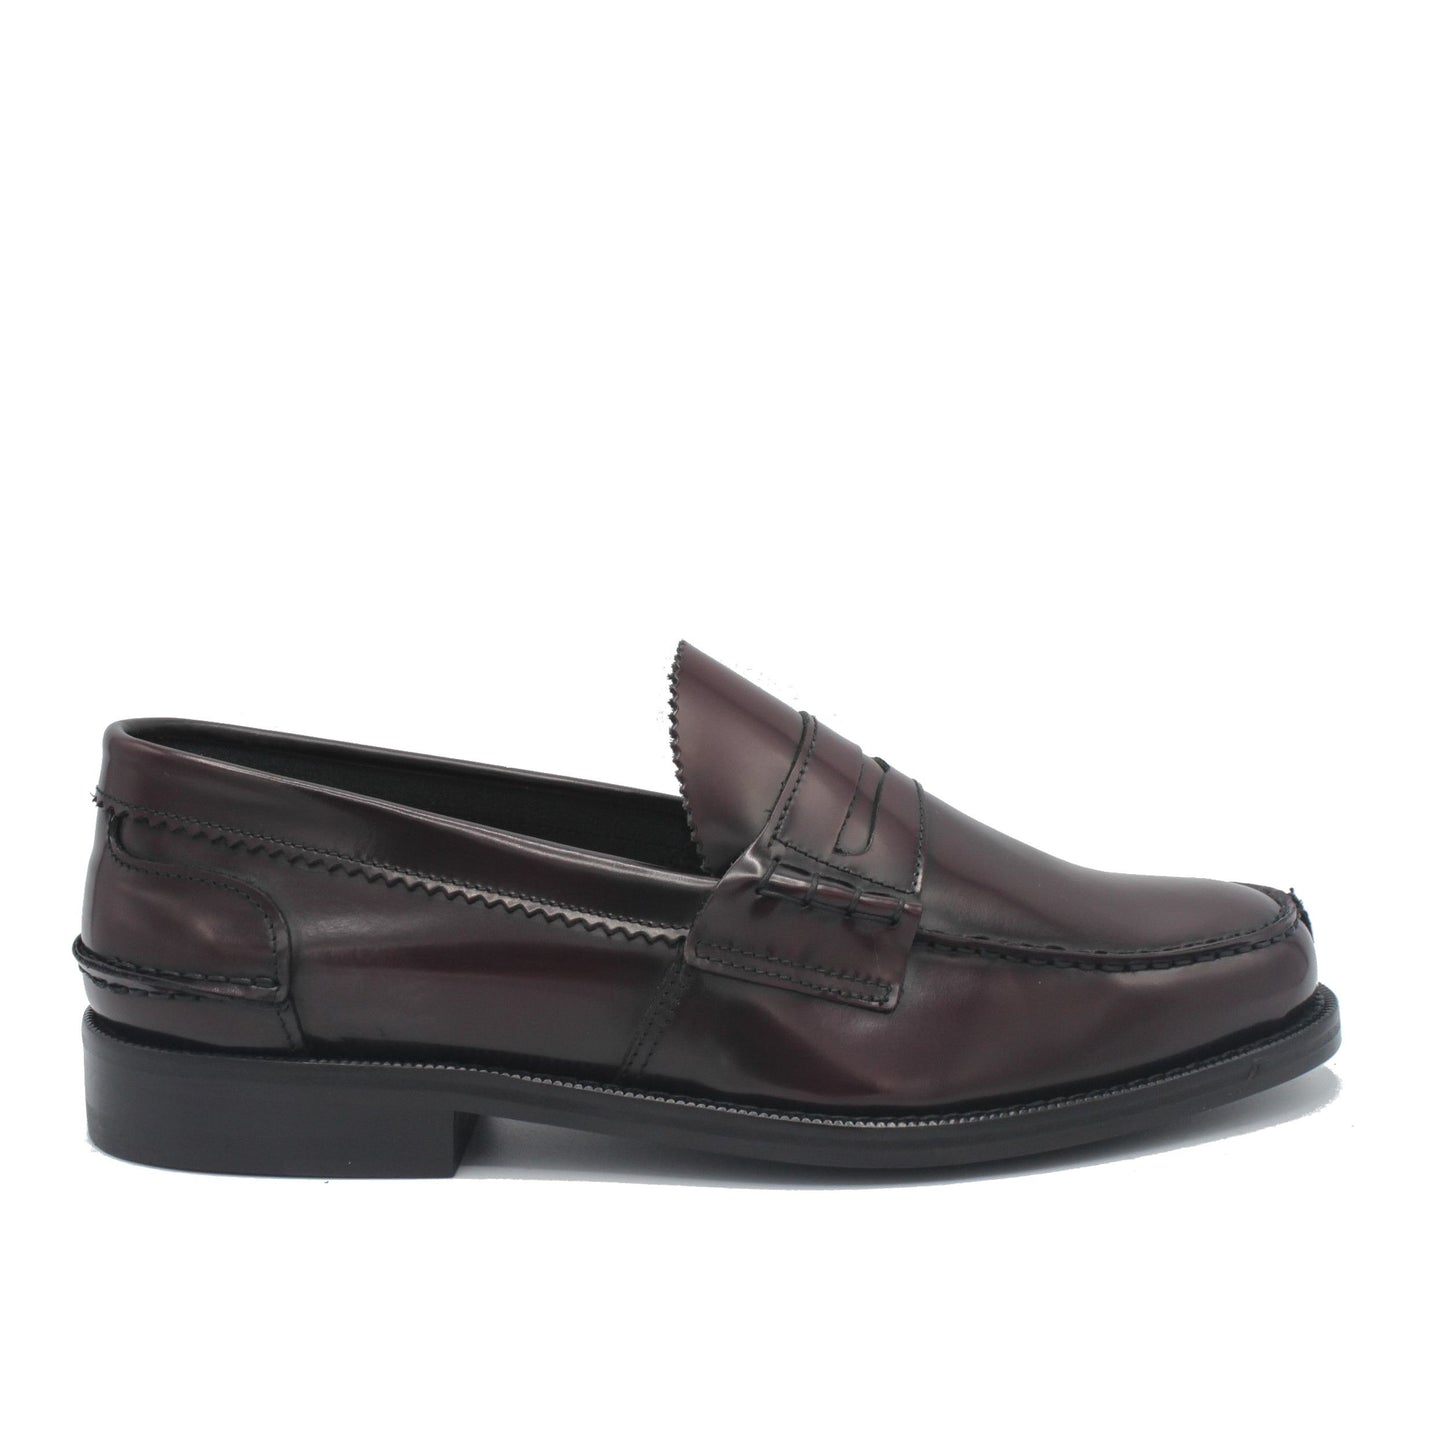 Bordeaux Spazzolato Leather Mens Loafers Shoes